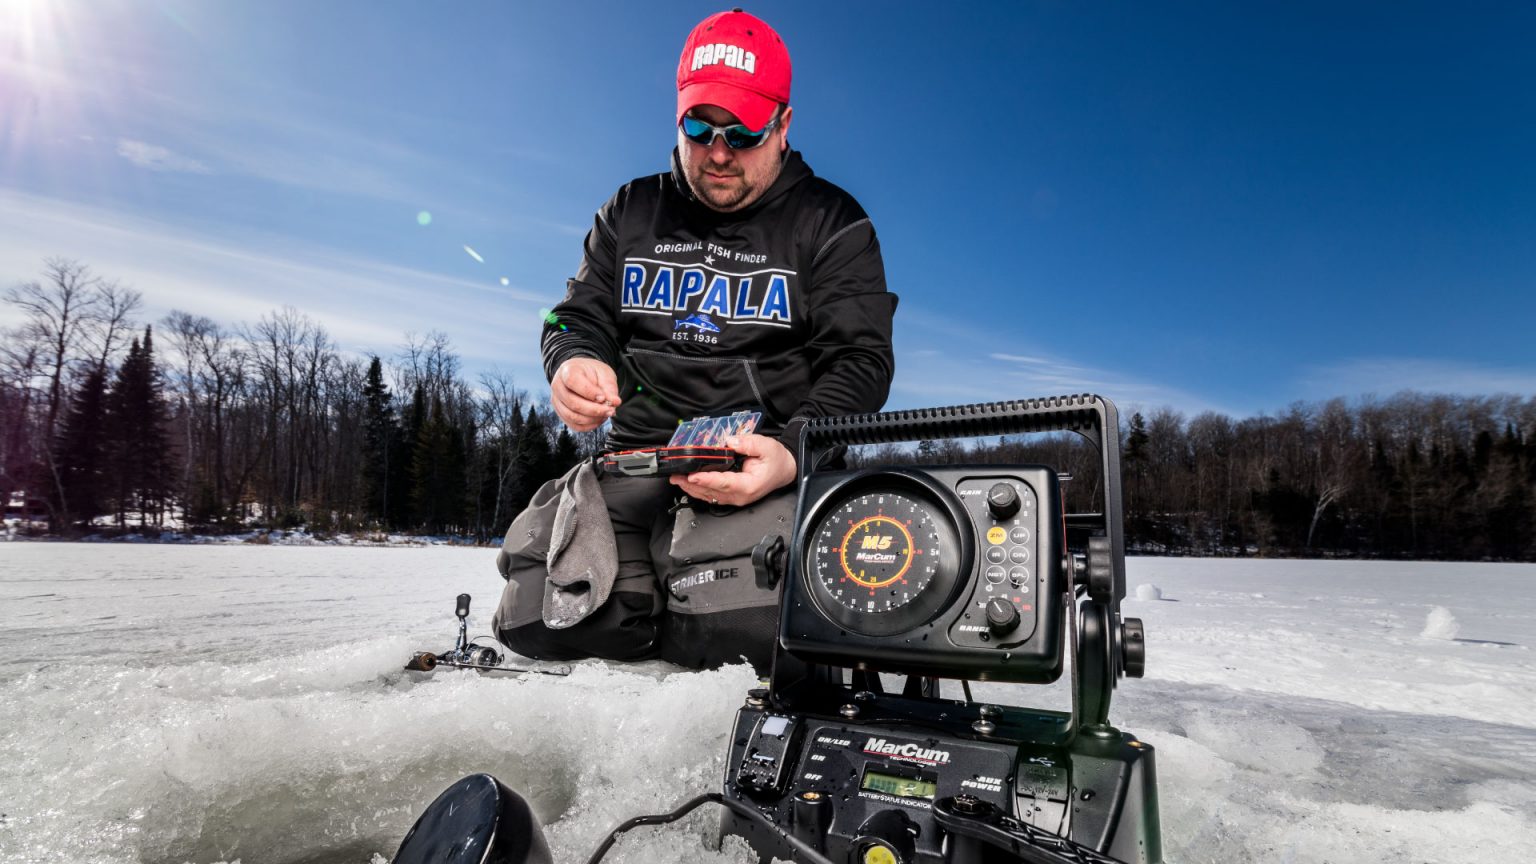 Using Regular Fish Finders for Ice Fishing. Is It an Option? - Fishing & Hunting